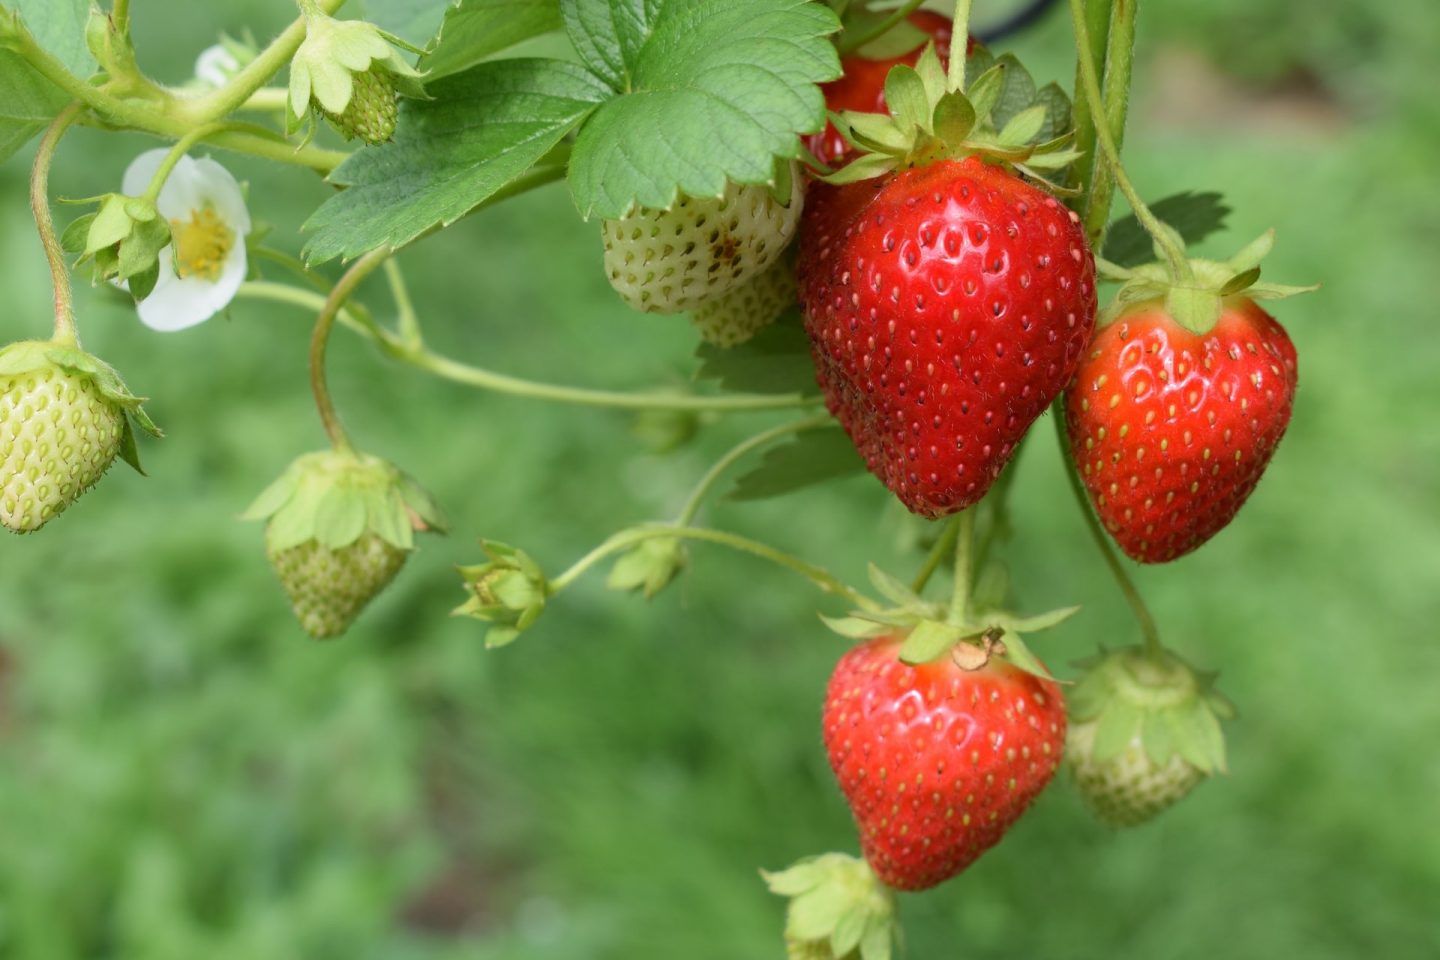 Ripe red strawberries growing on the plant